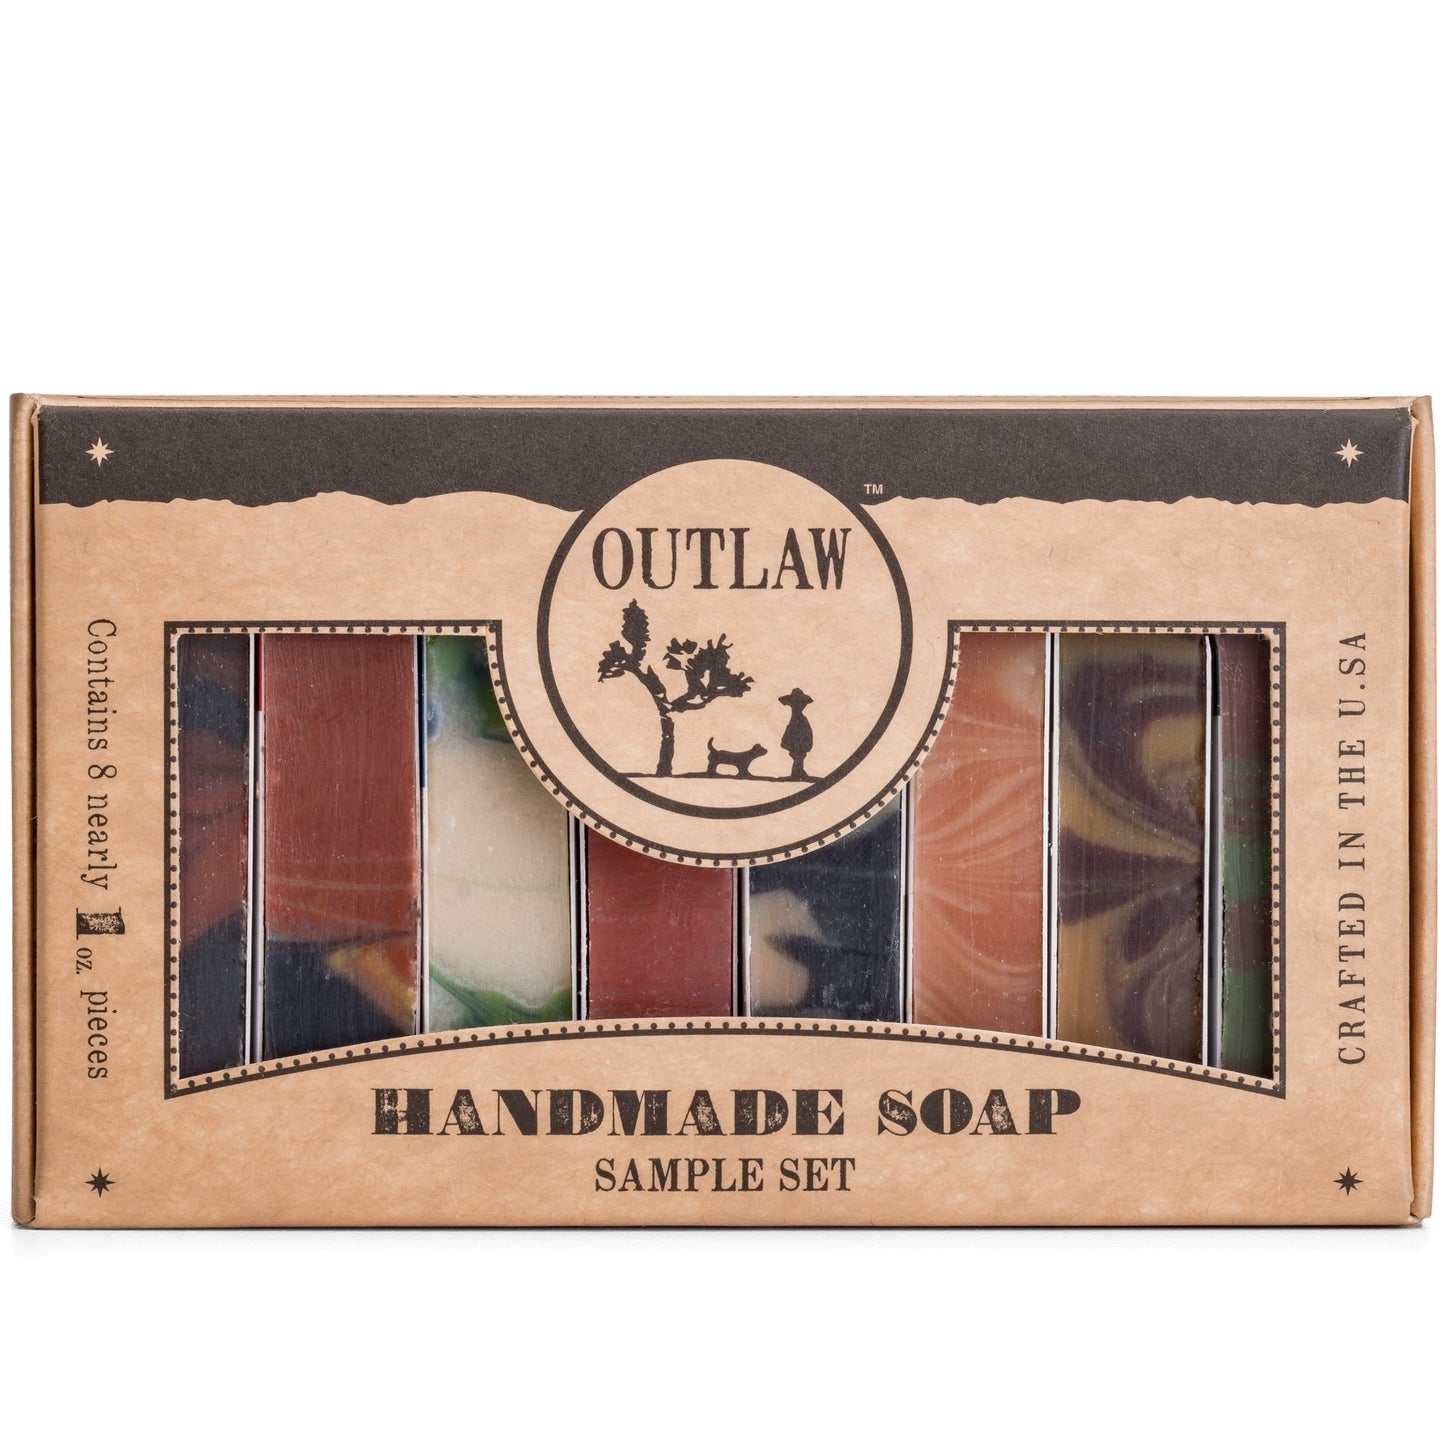 Handmade Soap Samples from Outlaw for men and women